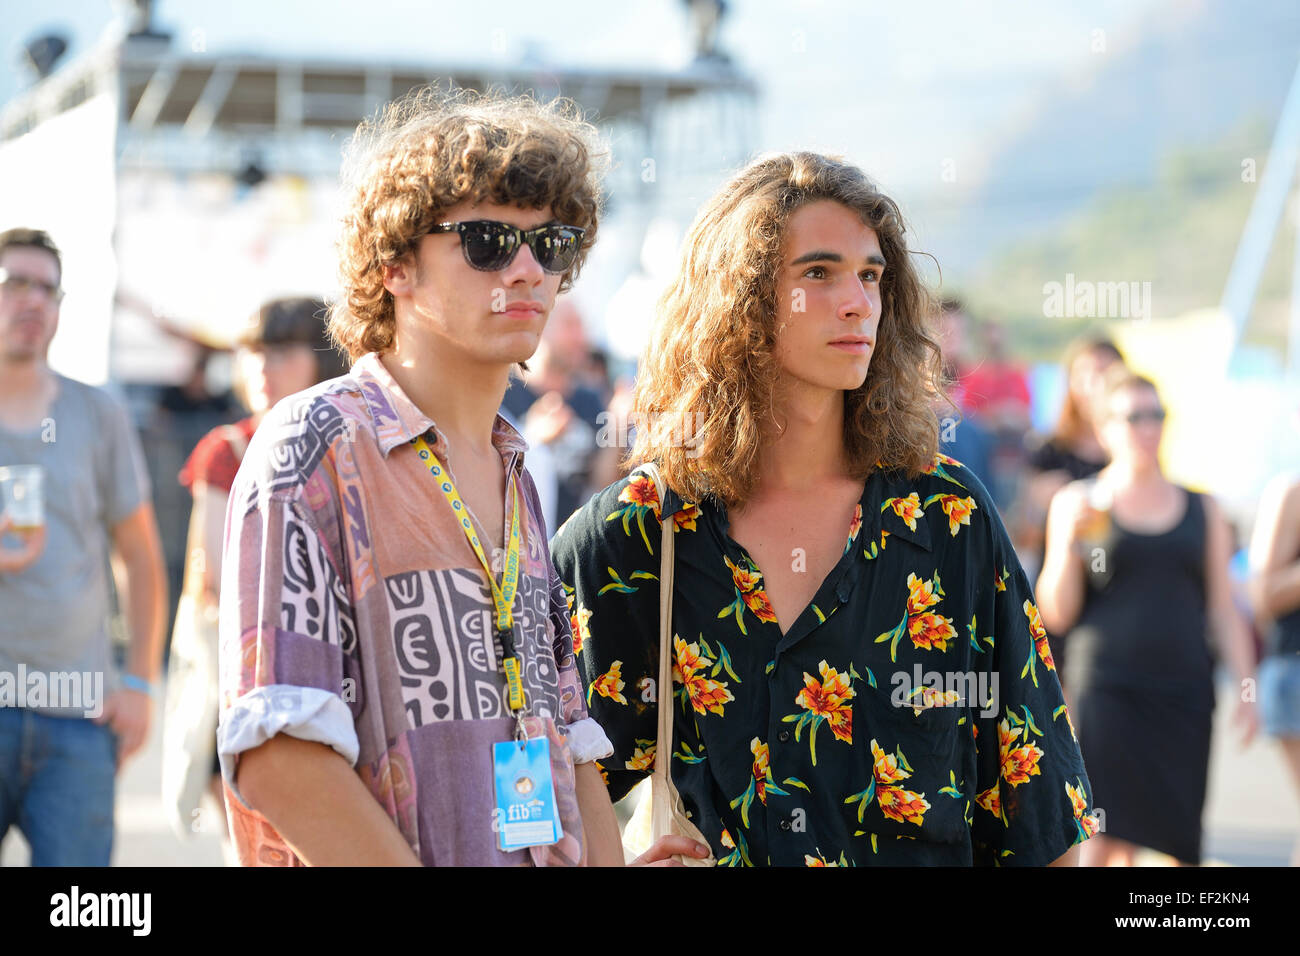 BENICASSIM, SPAIN - JULY 19: Hipsters (modern people) from the audience at FIB Festival on July 19, 2014 in Benicassim, Spain. Stock Photo